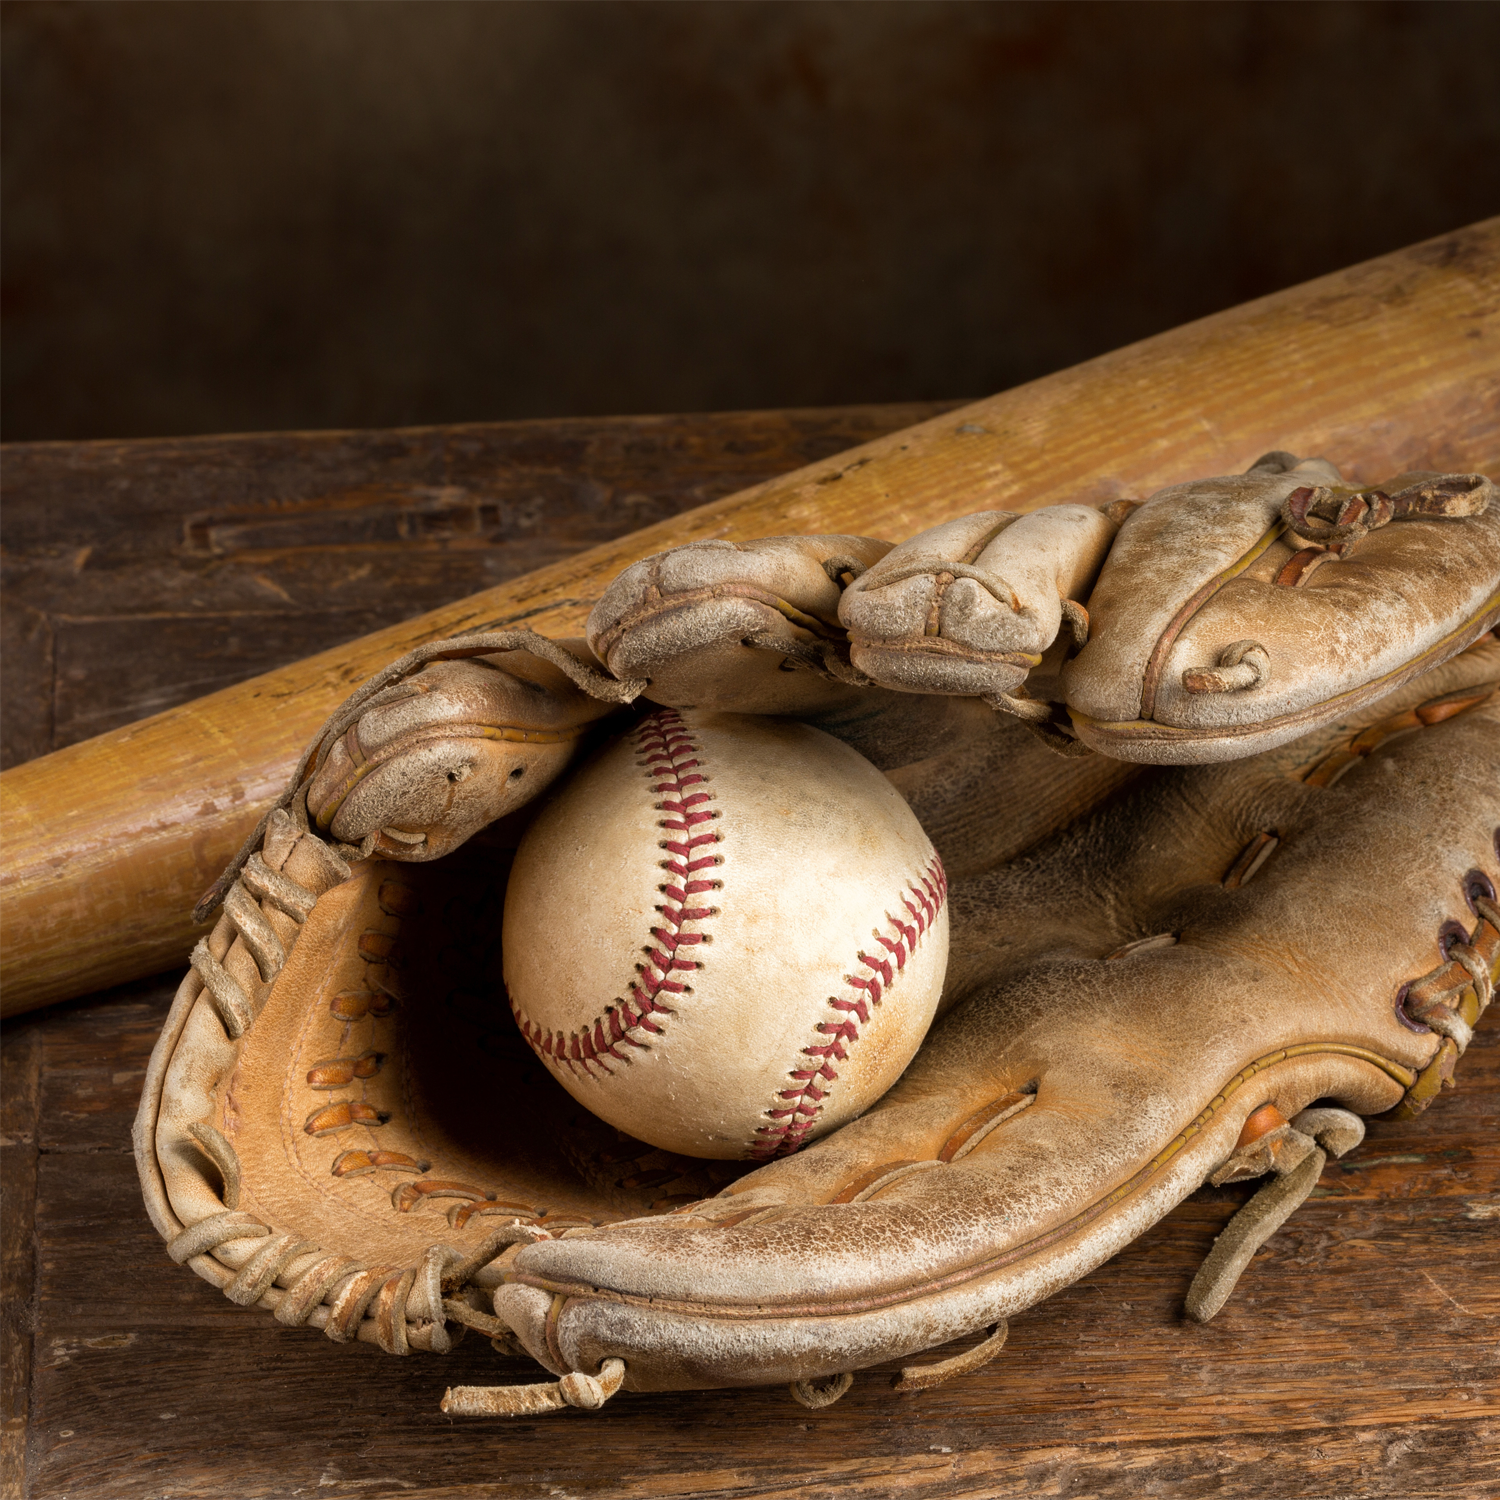 How to Break-In a Baseball Glove Effectively